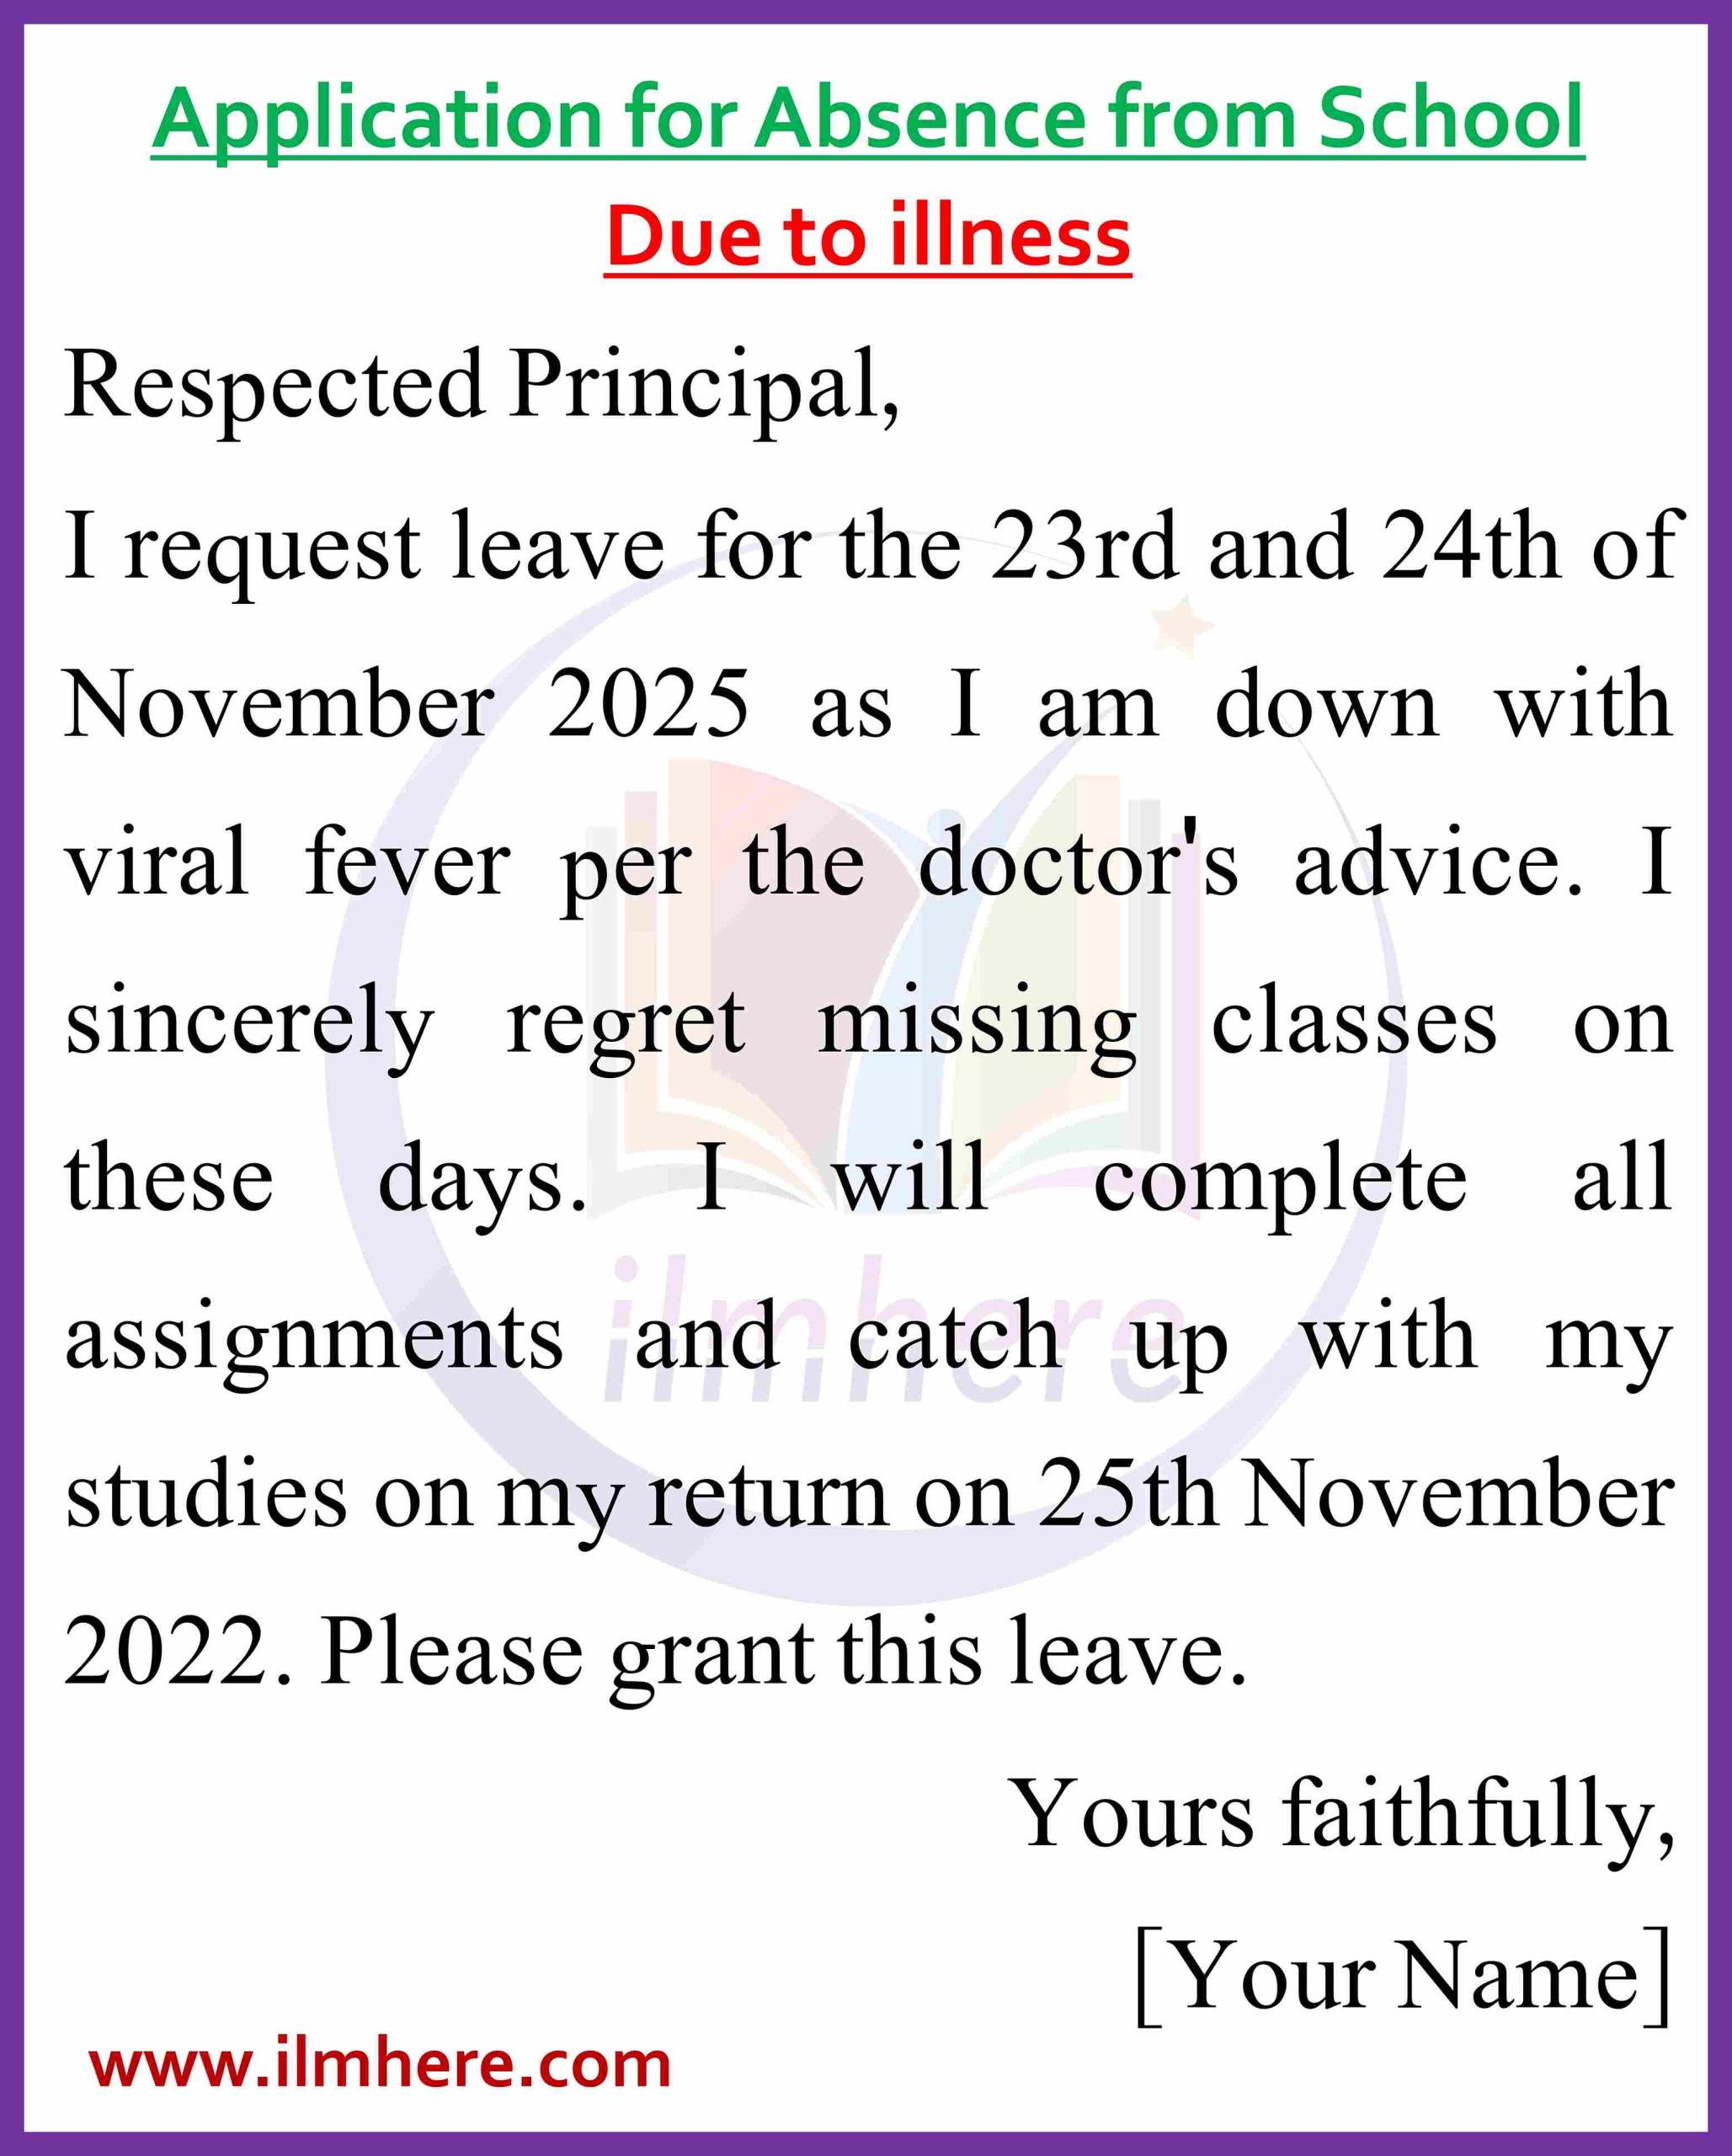 Application for Absence from School Due to Illness